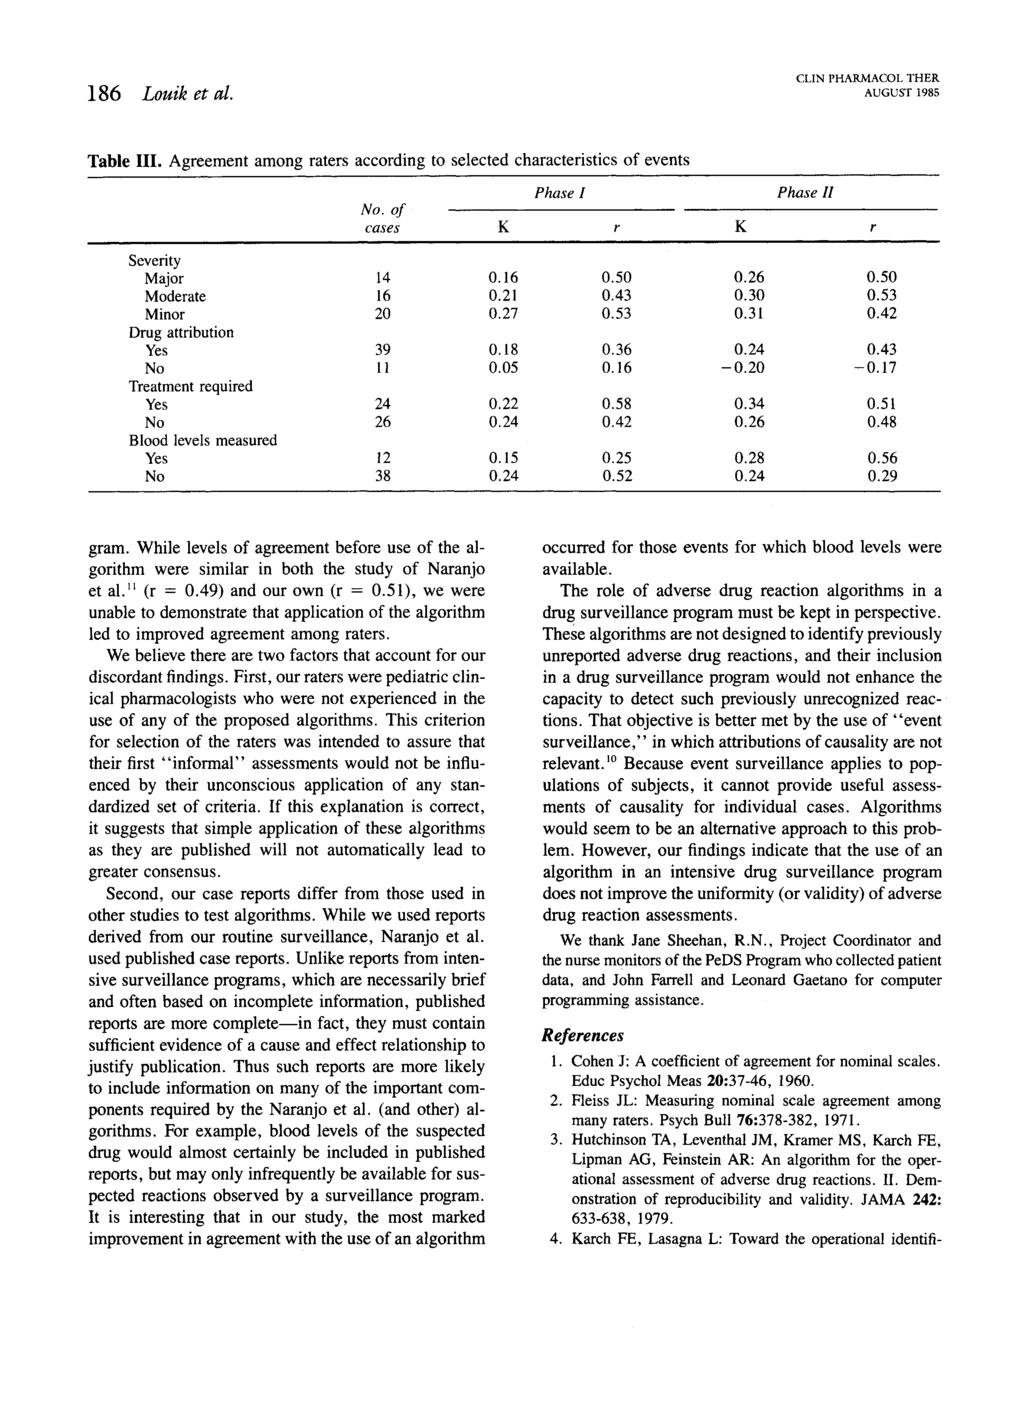 CLIN PHARMACOL THER 186 Louik et al. AUGUST 1985 Table III. Agreement among raters according to selected characteristics of events No. of cases I Severity Major 14 0.16 0.50 0.26 0.50 Moderate 16 0.